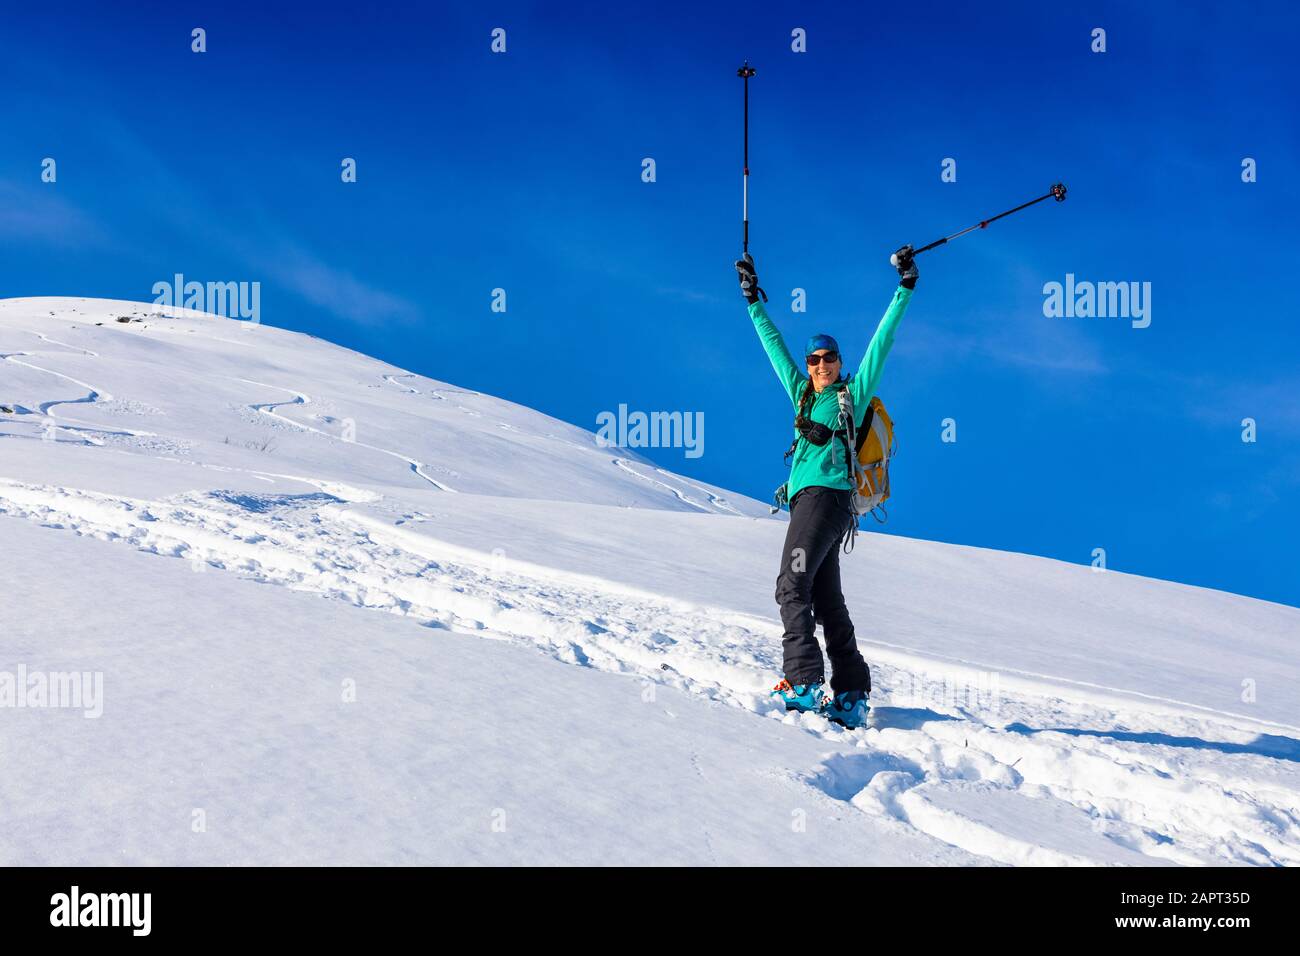 Woman backcountry skiing, celebrating a beautiful day with her poles in the air, climbing up mountain in skin track, on AT skis and skins in Hatche... Stock Photo